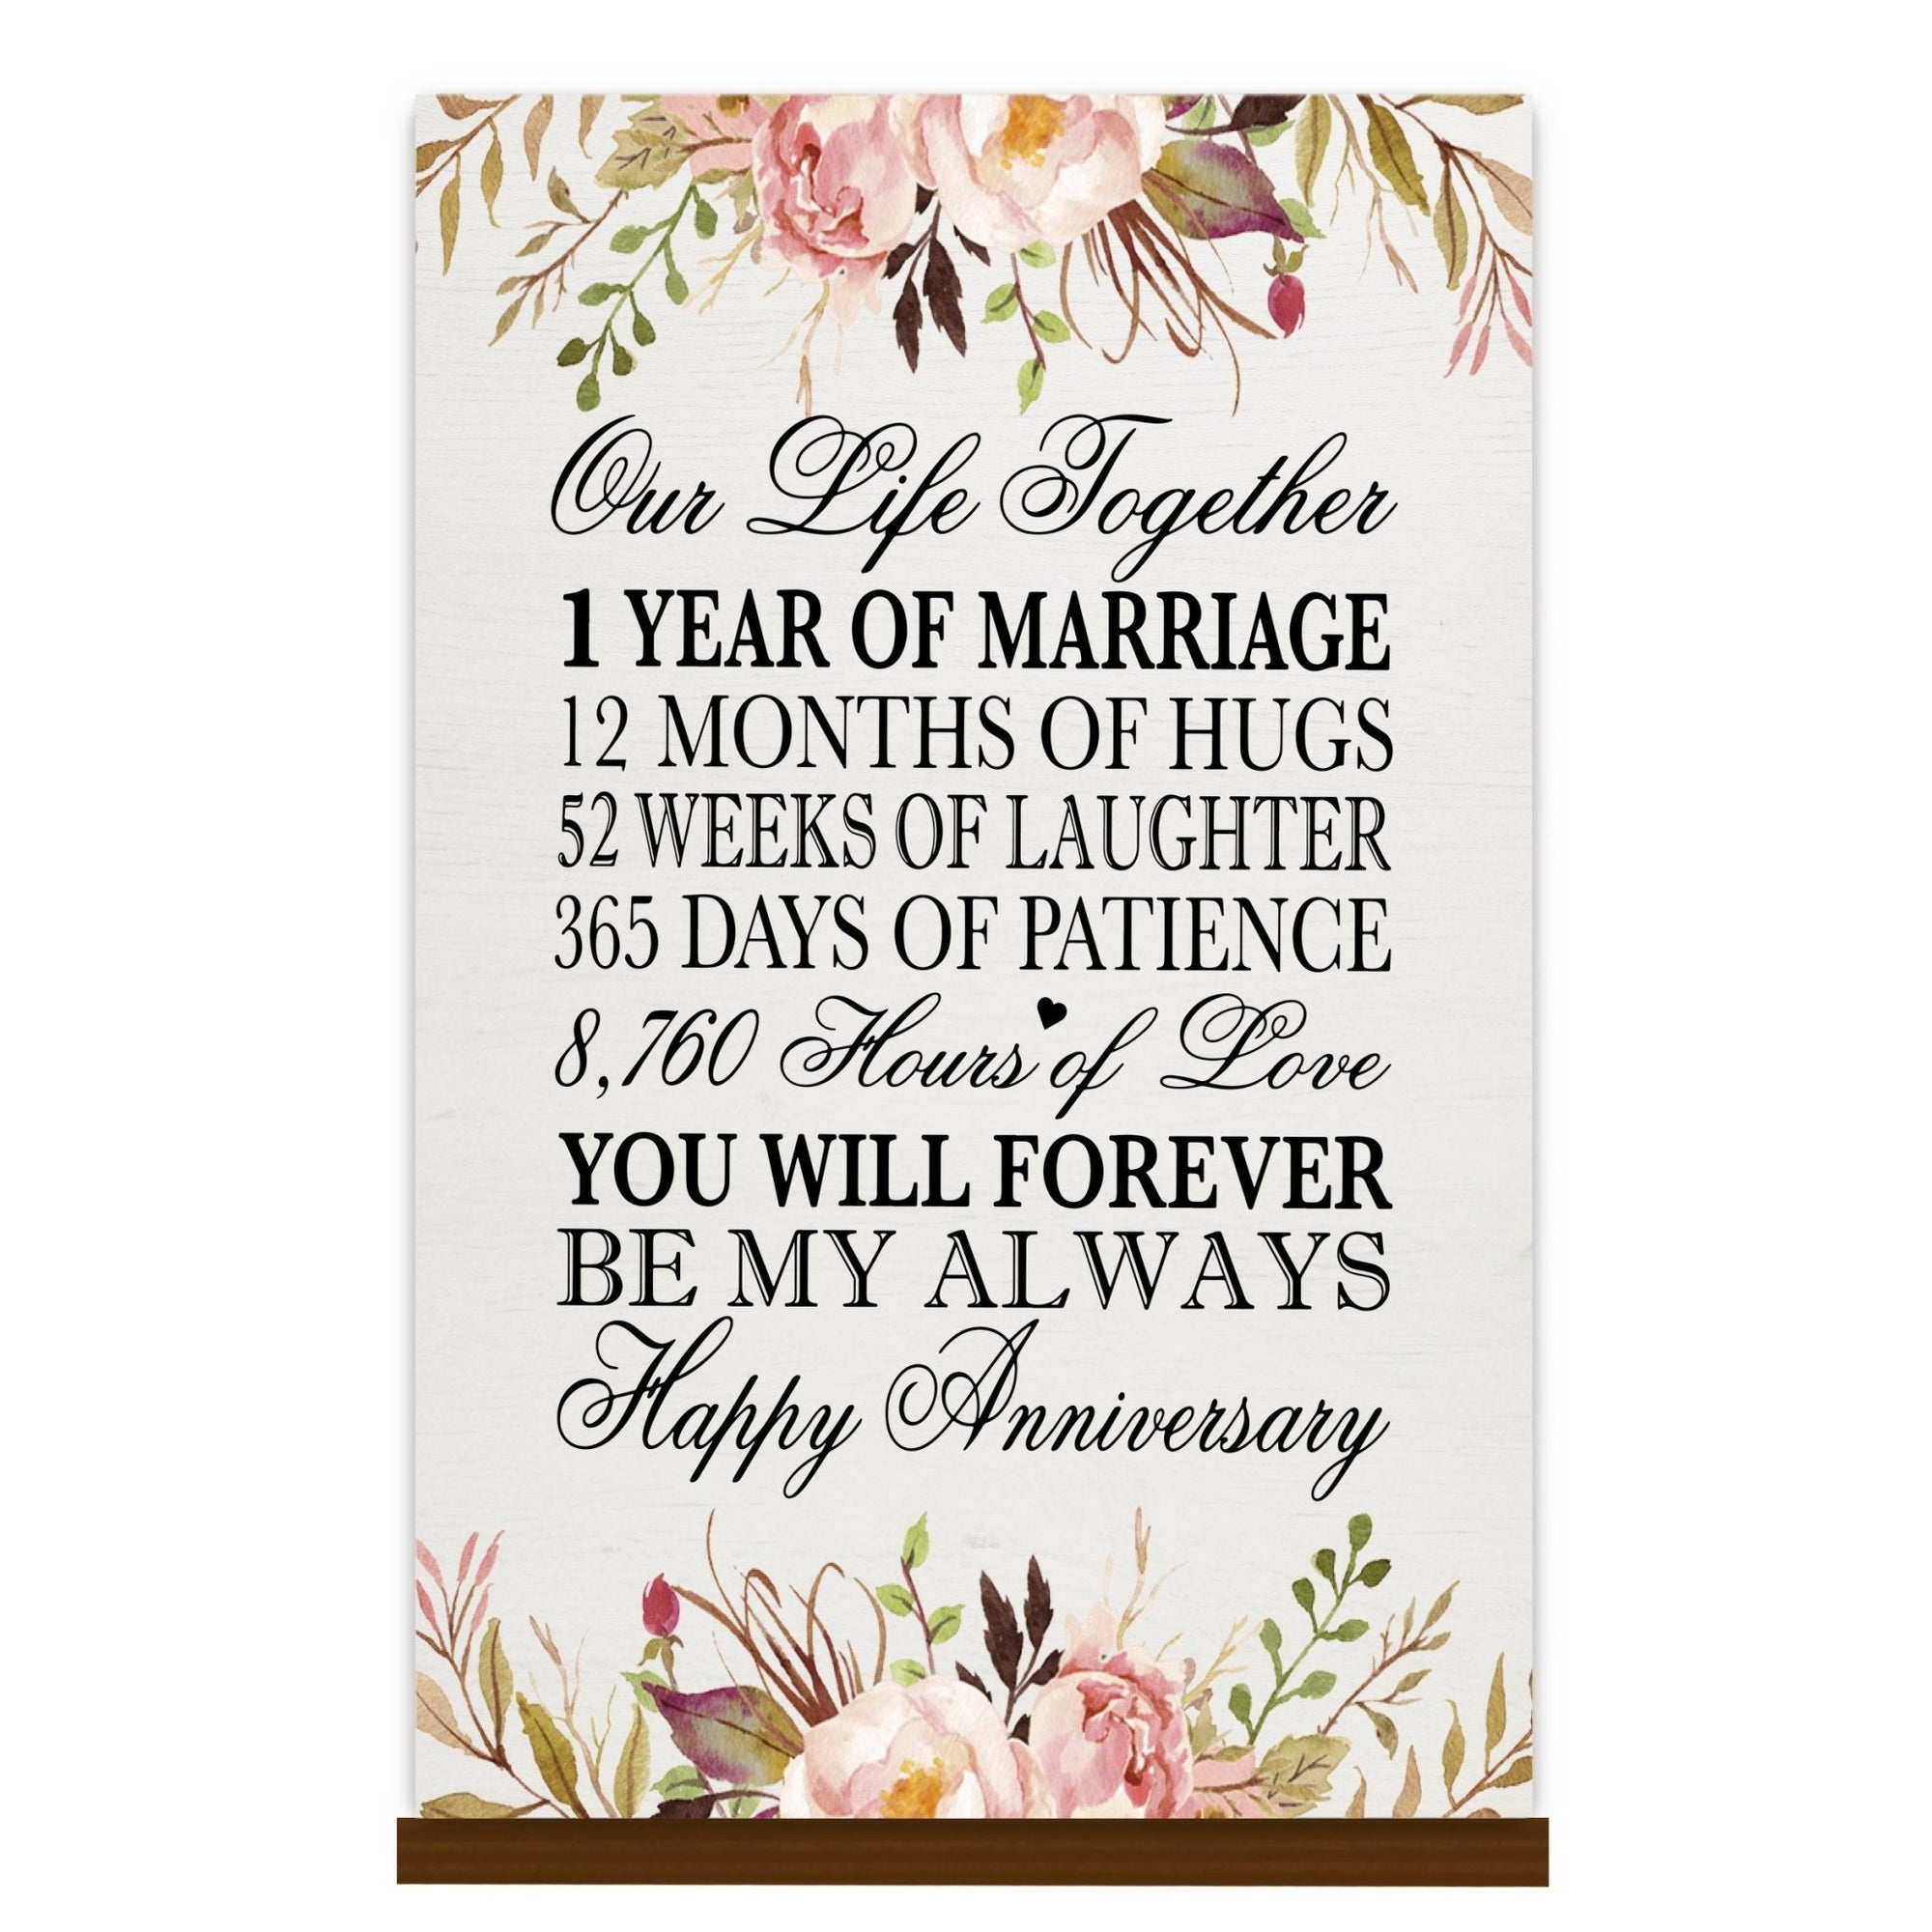 LifeSong Milestones 1st Anniversary Wall Plaque for Couples